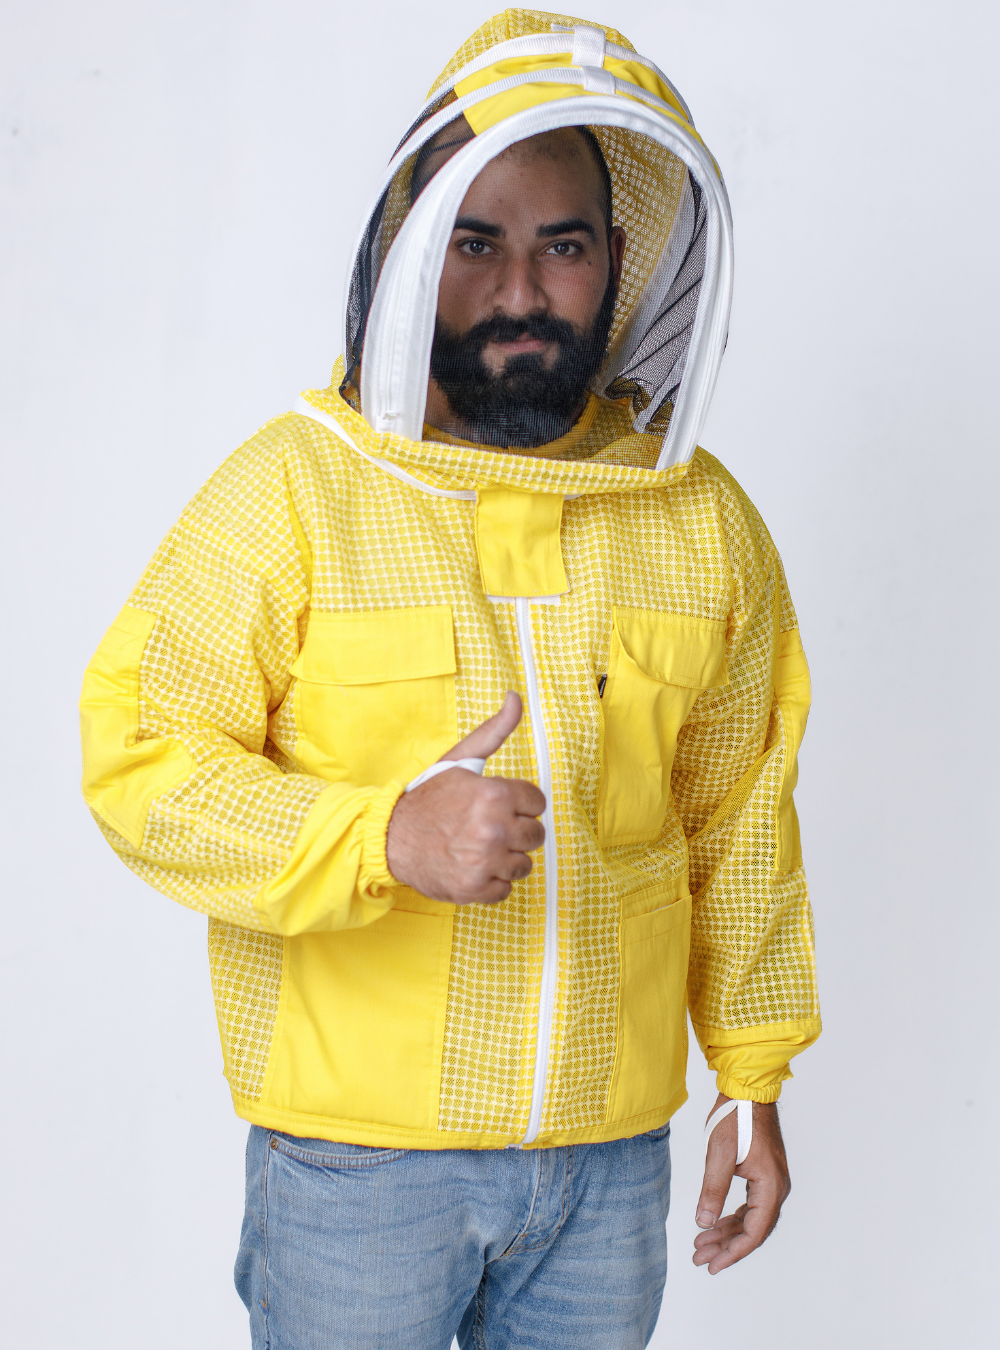 Beekeeper is wearing Stylish yet functional Yellow Beekeeping Ventilated Jacket incorporating a Fencing Vail, multiple pockets, and double-stitched construction for durability.